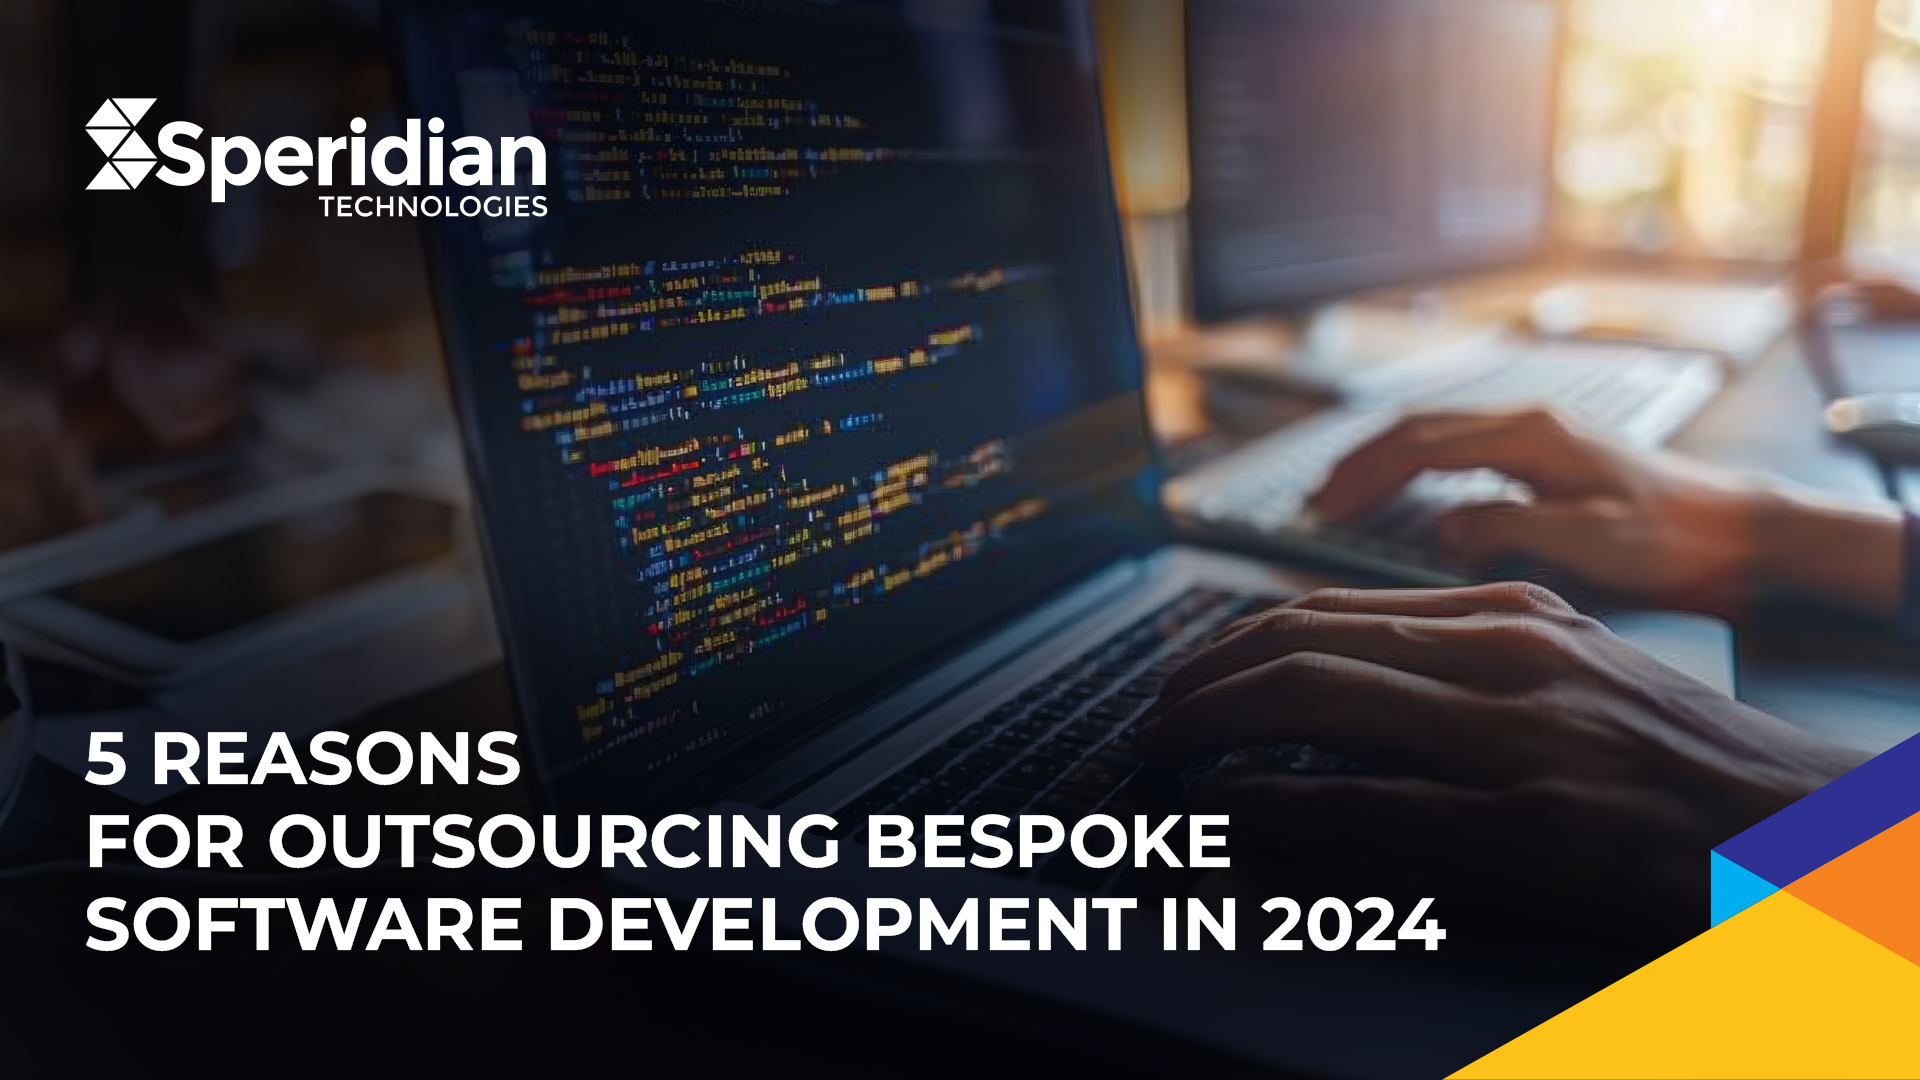 5 reasons for outsourcing bespoke software development in 2024